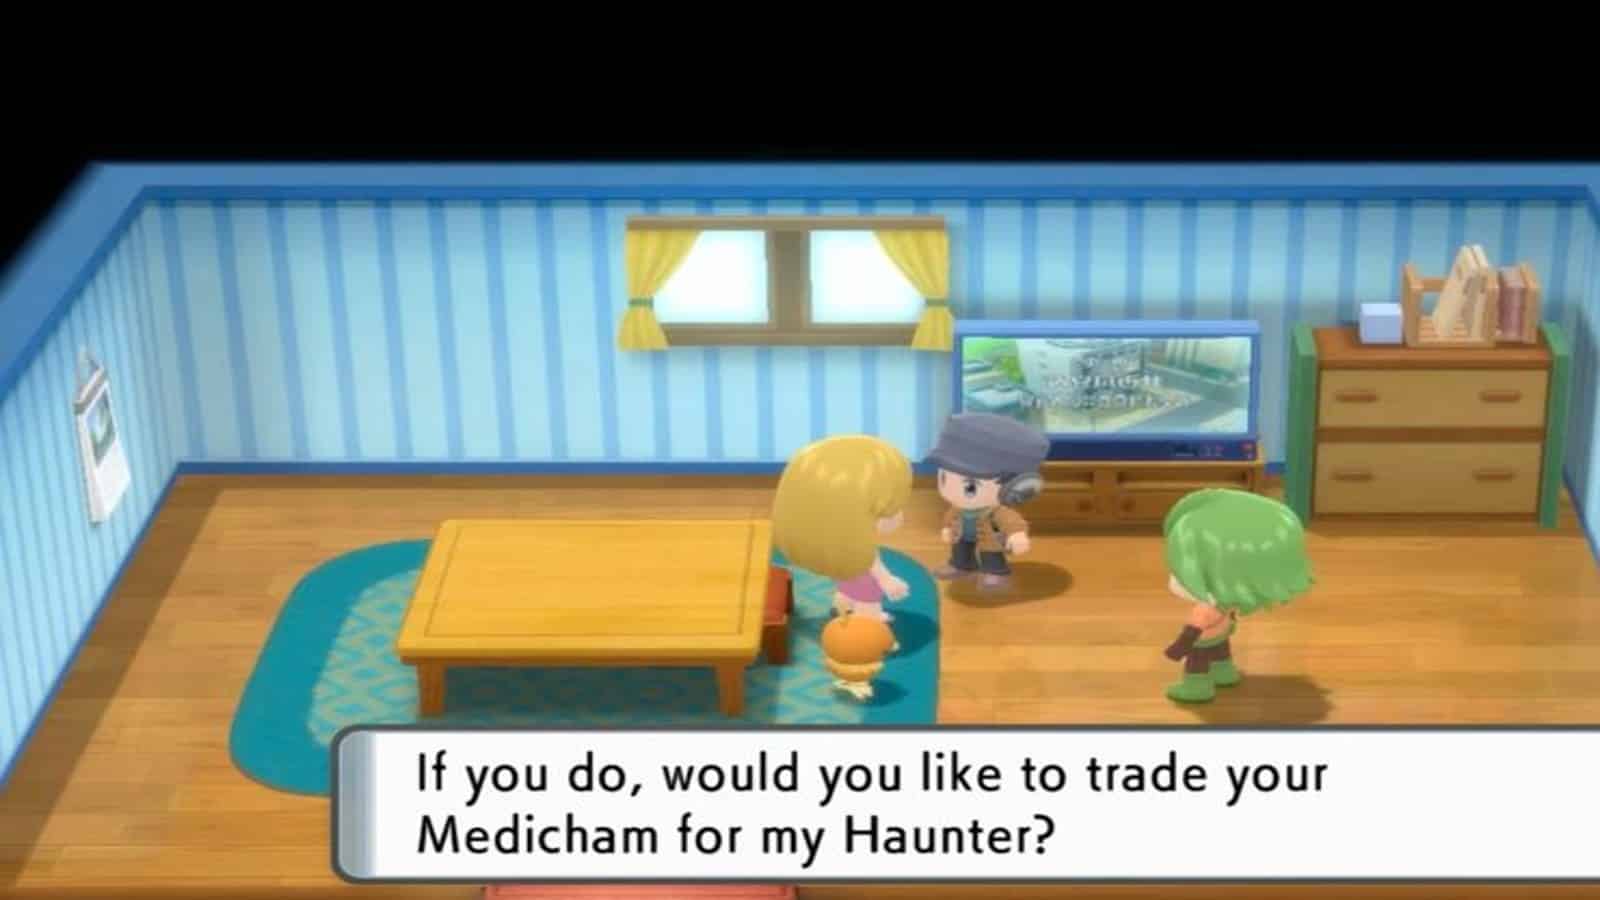 Mindy will trade players a Haunter holding an Everstone for the player's Medicham